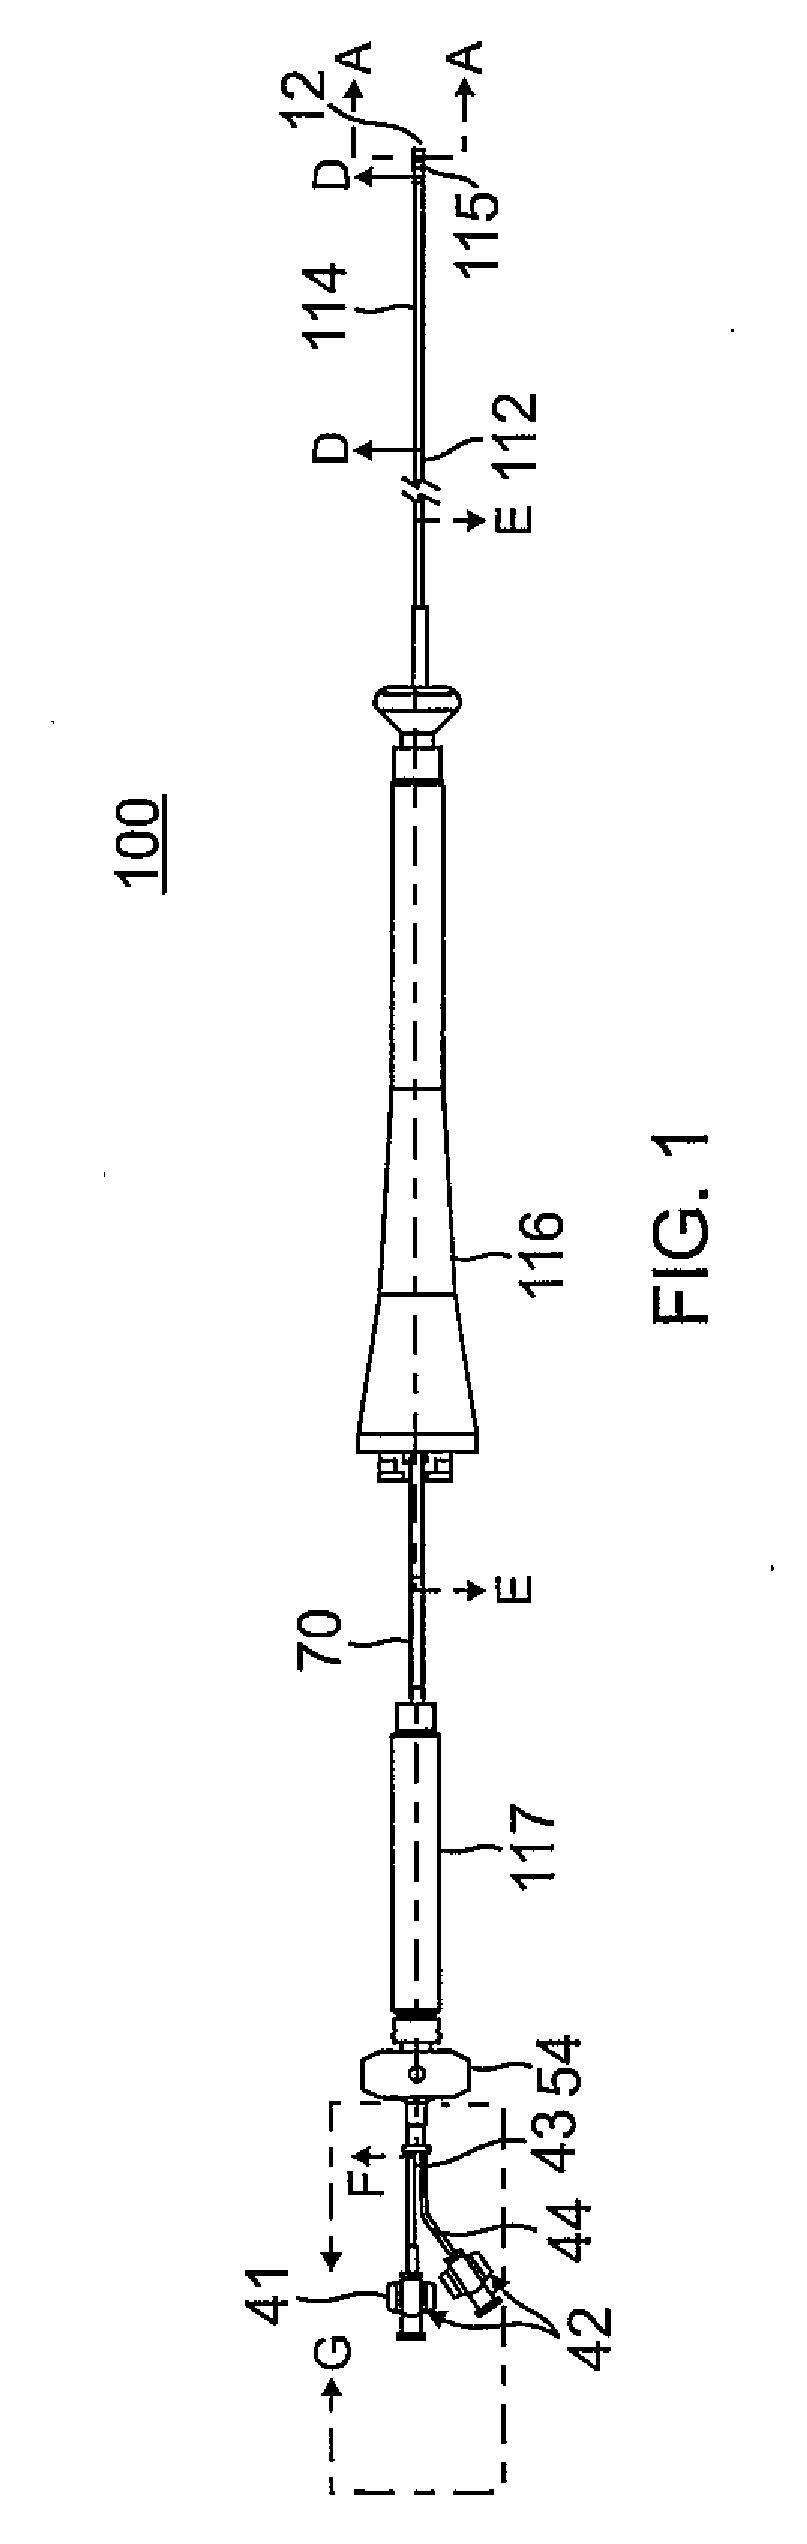 Ablation catheter with dedicated fluid paths and needle centering insert